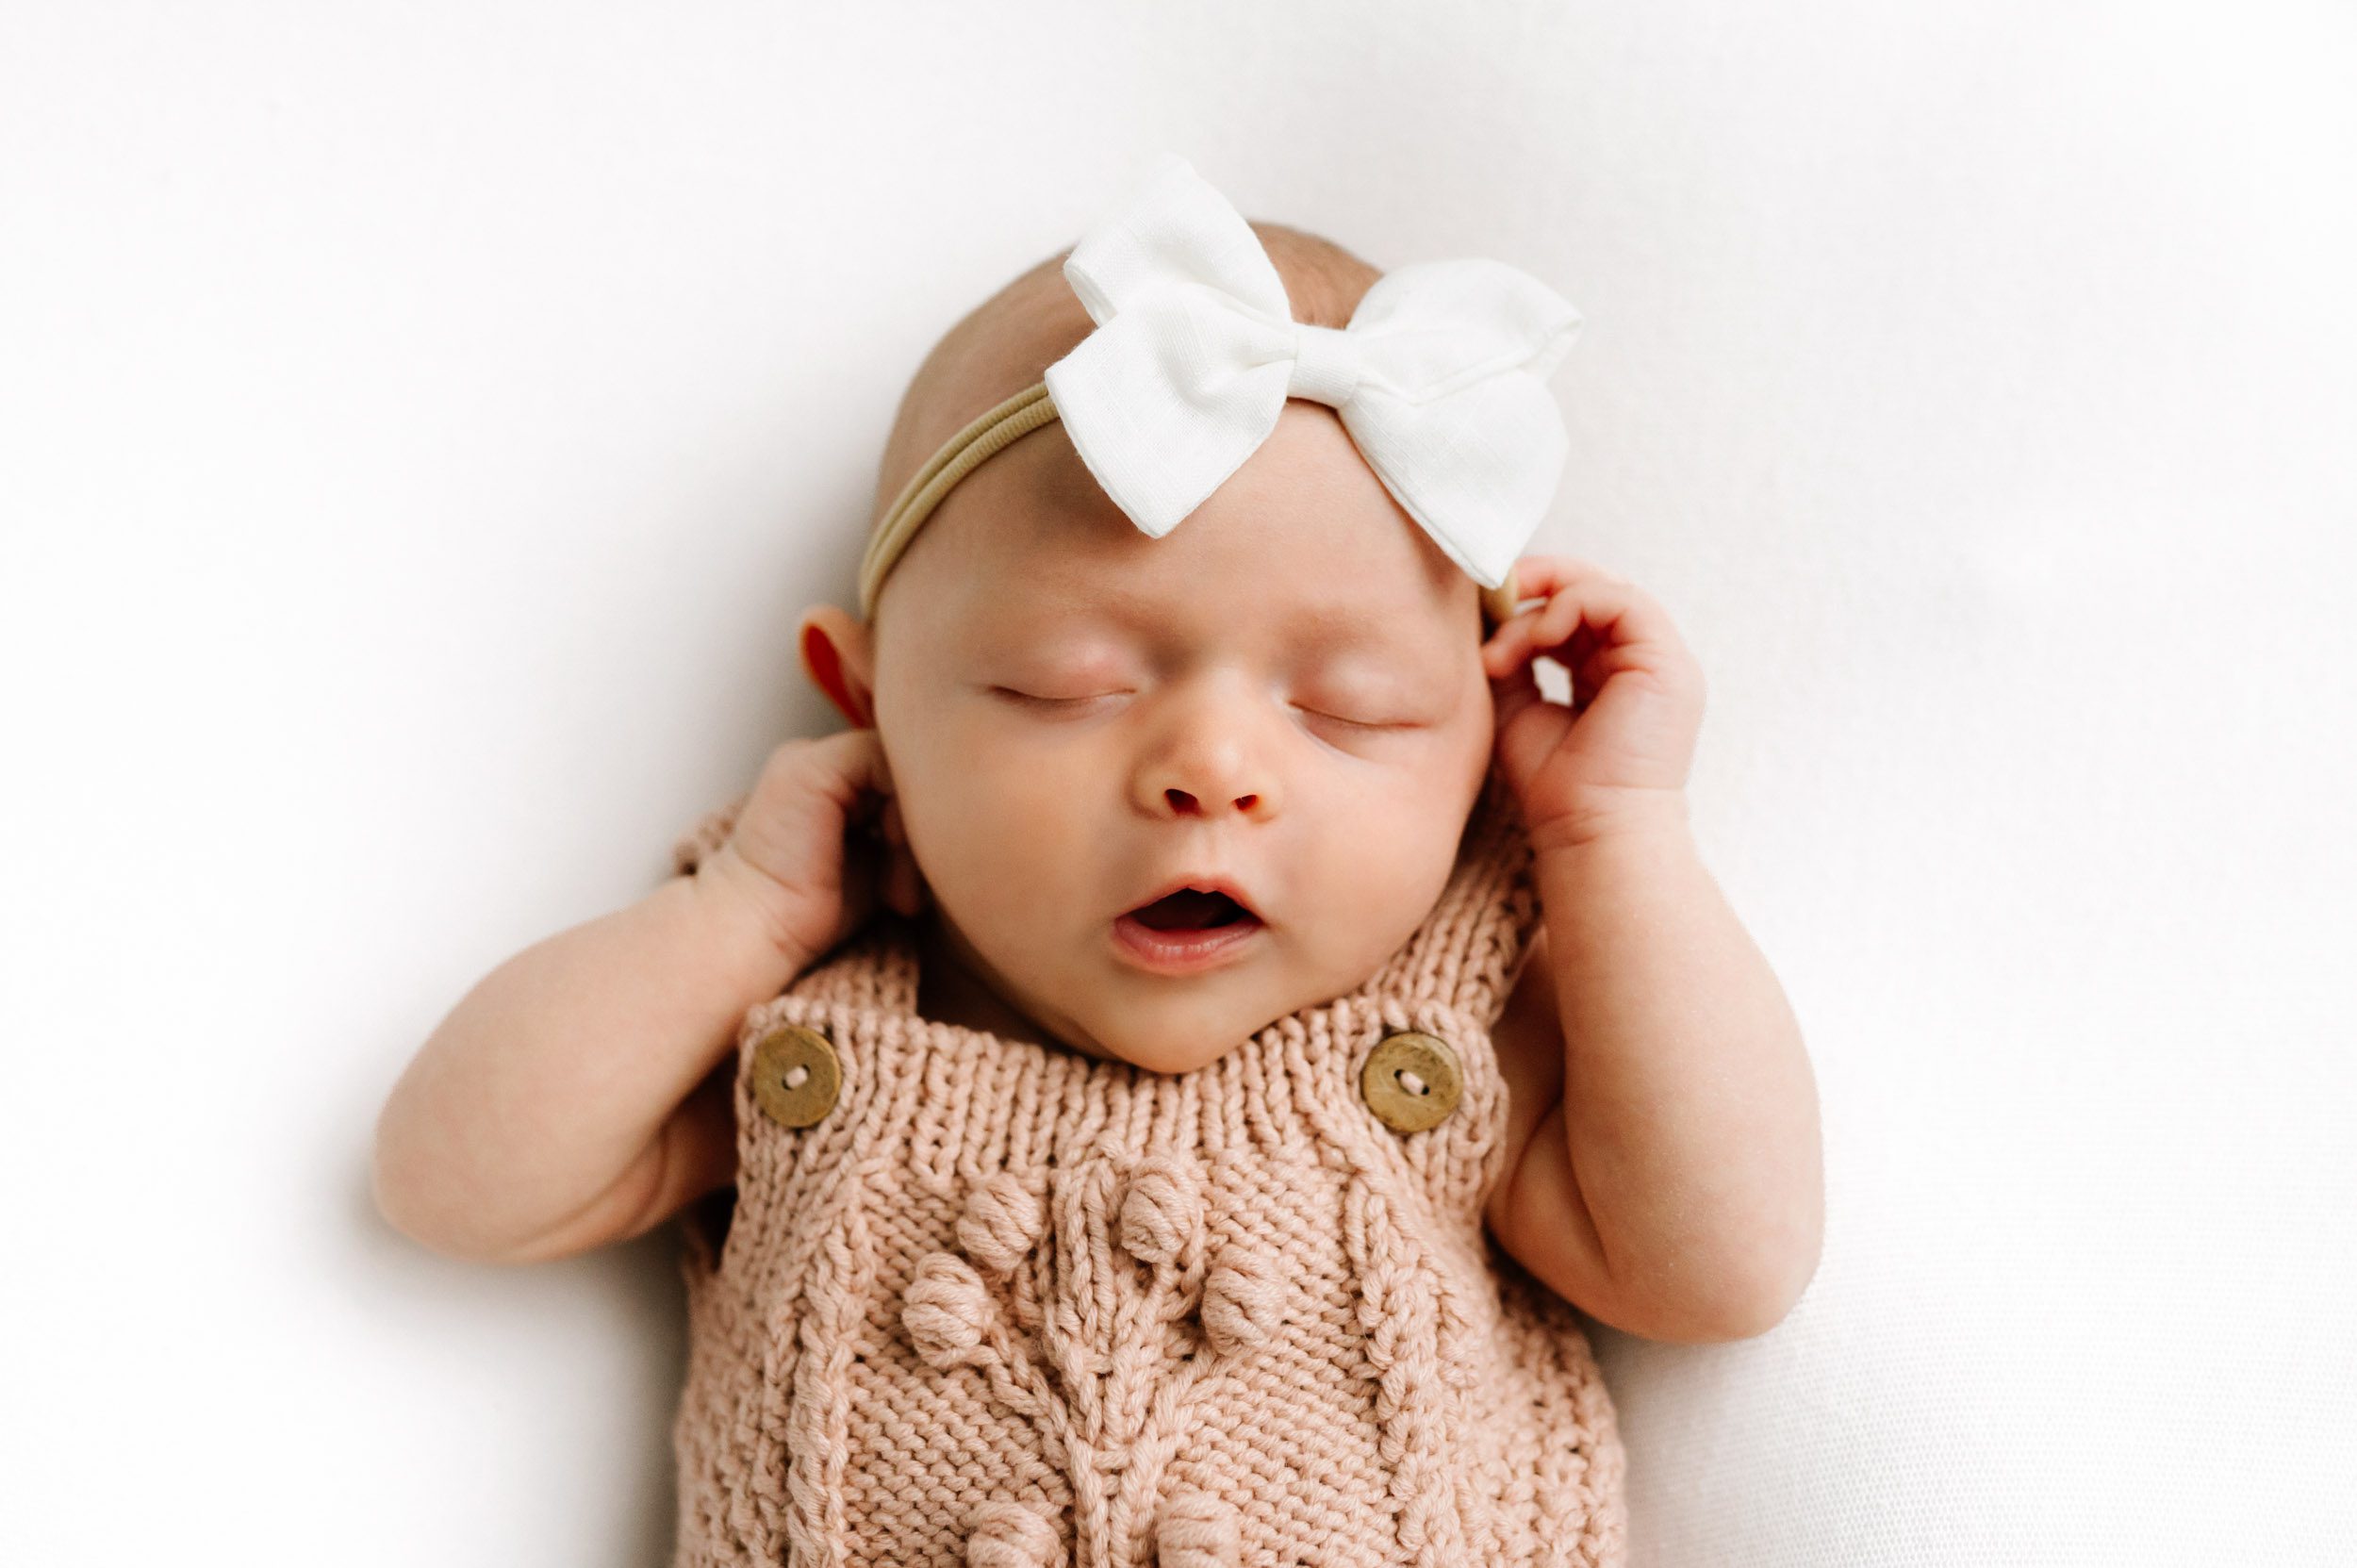 a baby girl wearing a pink knit romper and white headband laying on a white backdrop touching her hands to her cheeks with a surprised expression on her face during a newborn photoshoot